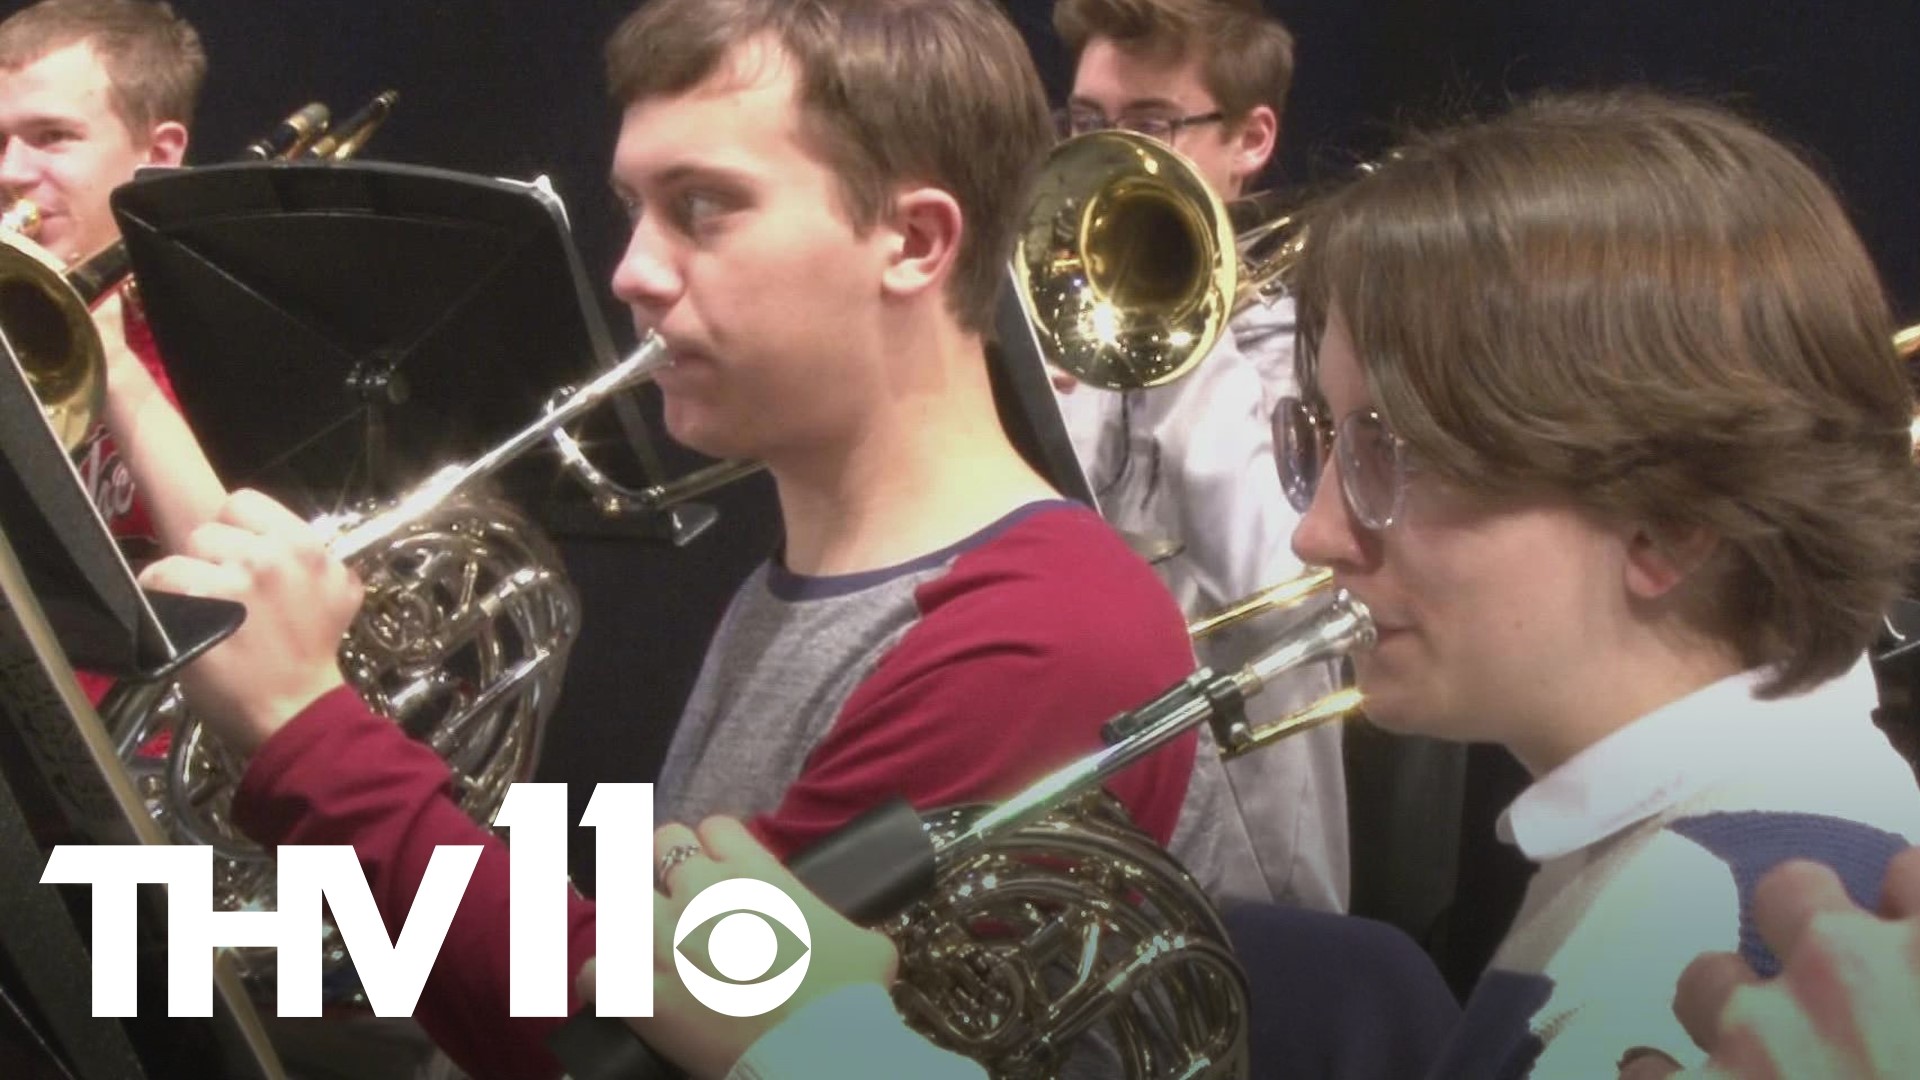 Members of the Cabot High School will soon be getting to put on a performance at Carnegie Hall to spread the Christmas spirit.